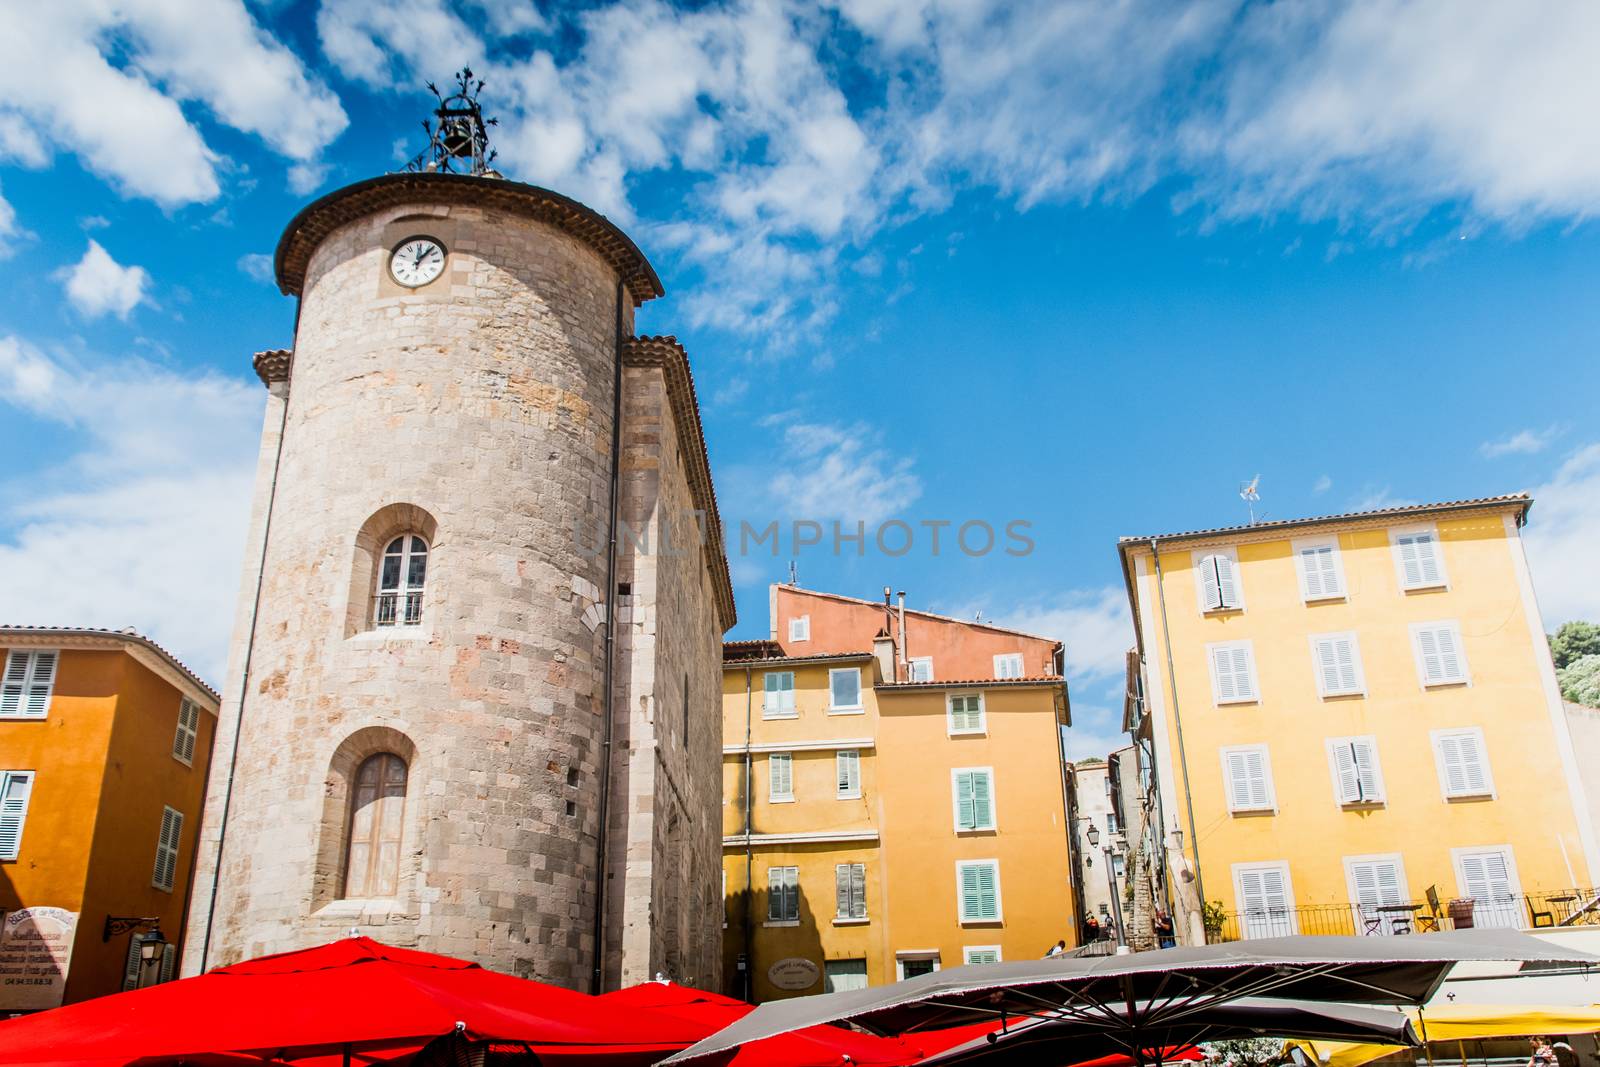 Templar Tower on Place Massillon in Hyères by raphtong